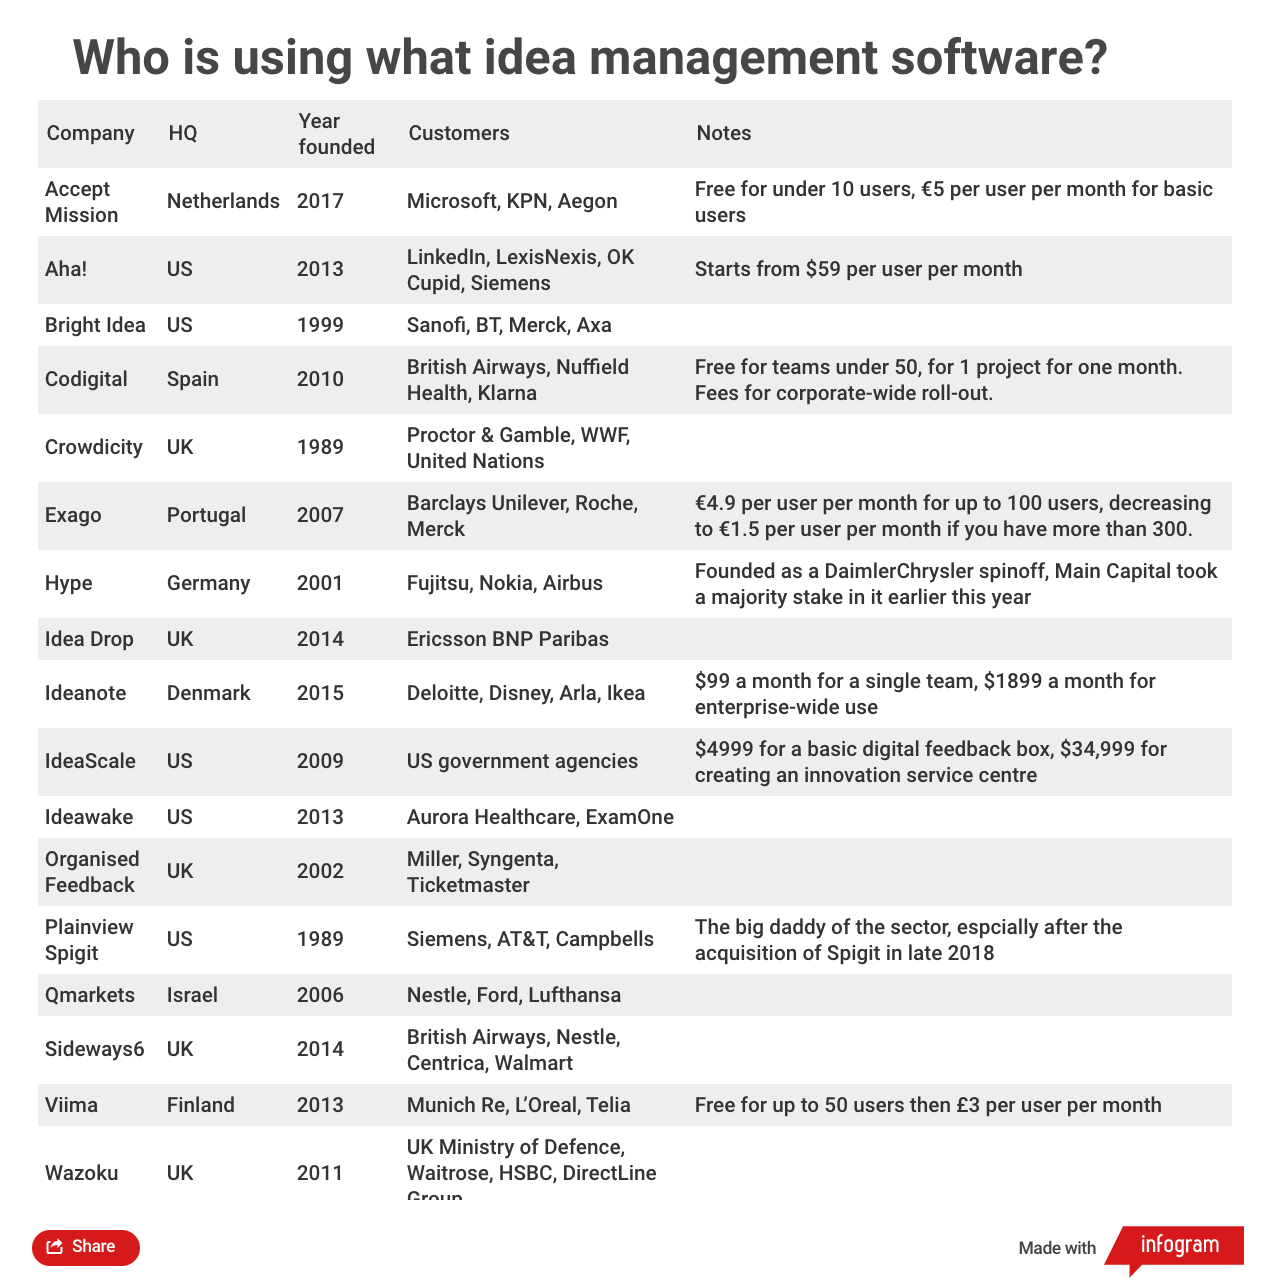 Table of idea management software companies